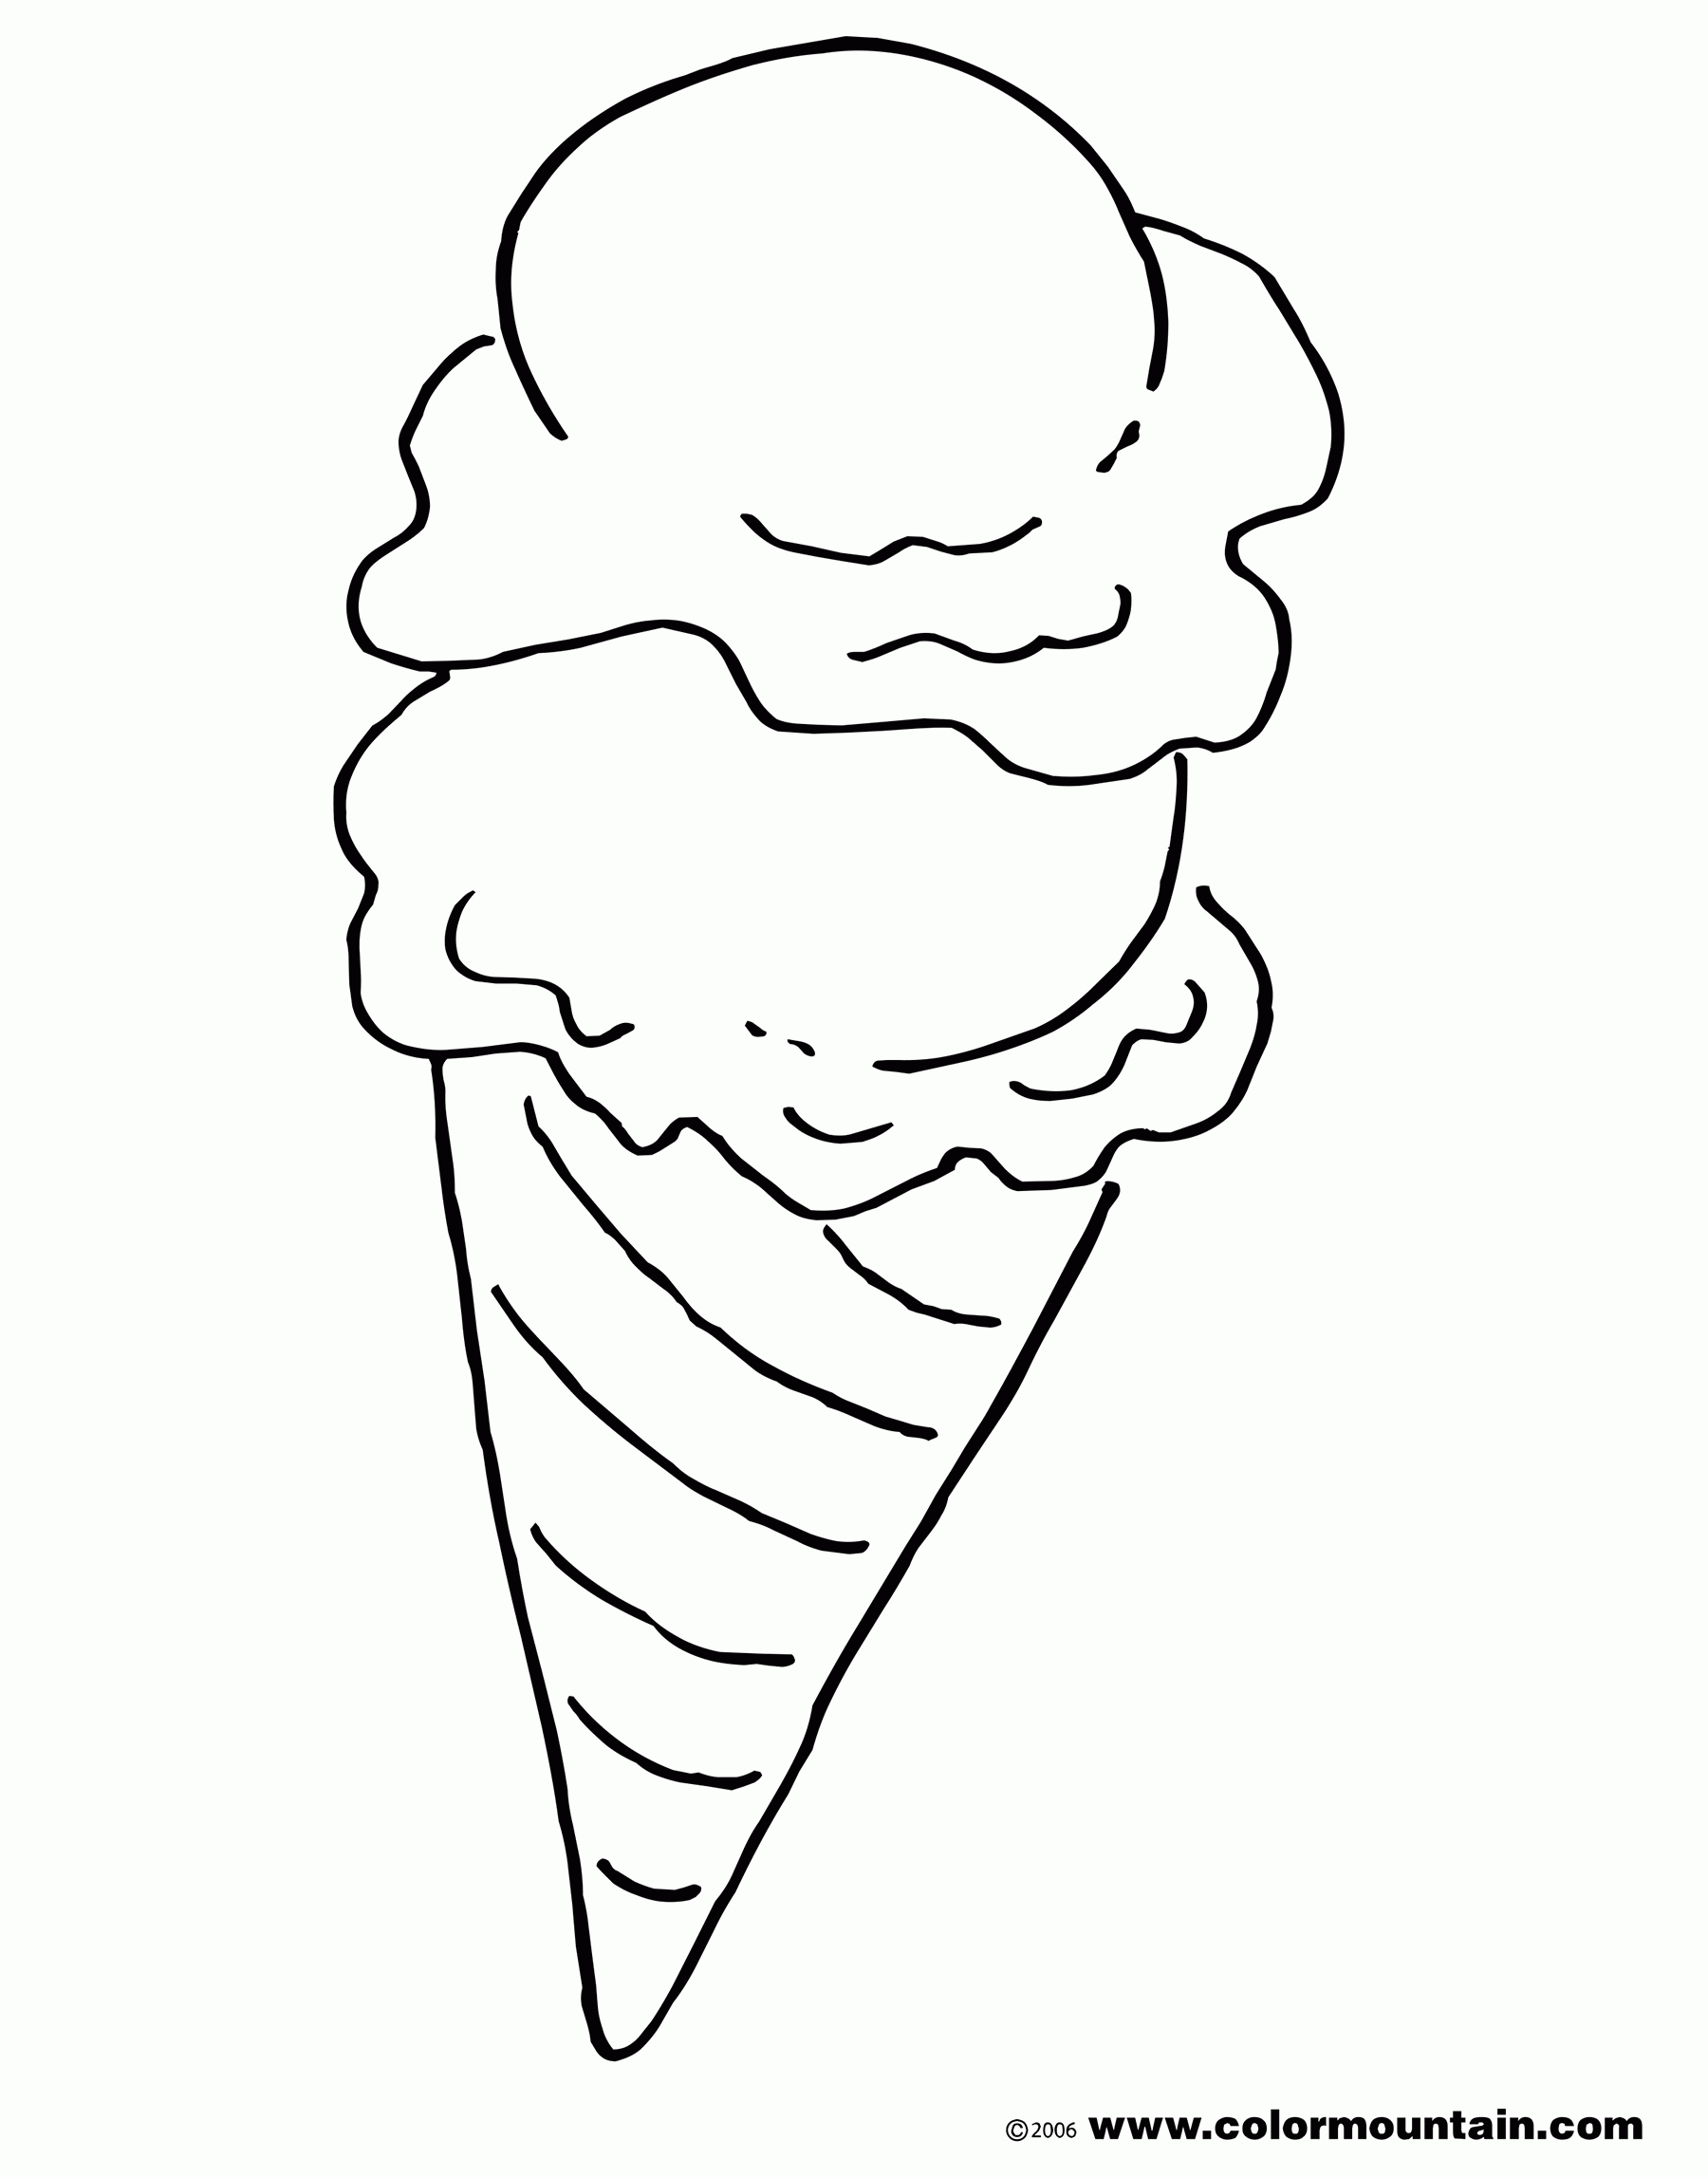 Ice Cream Cone Coloring Page - Create A Printout Or Activity